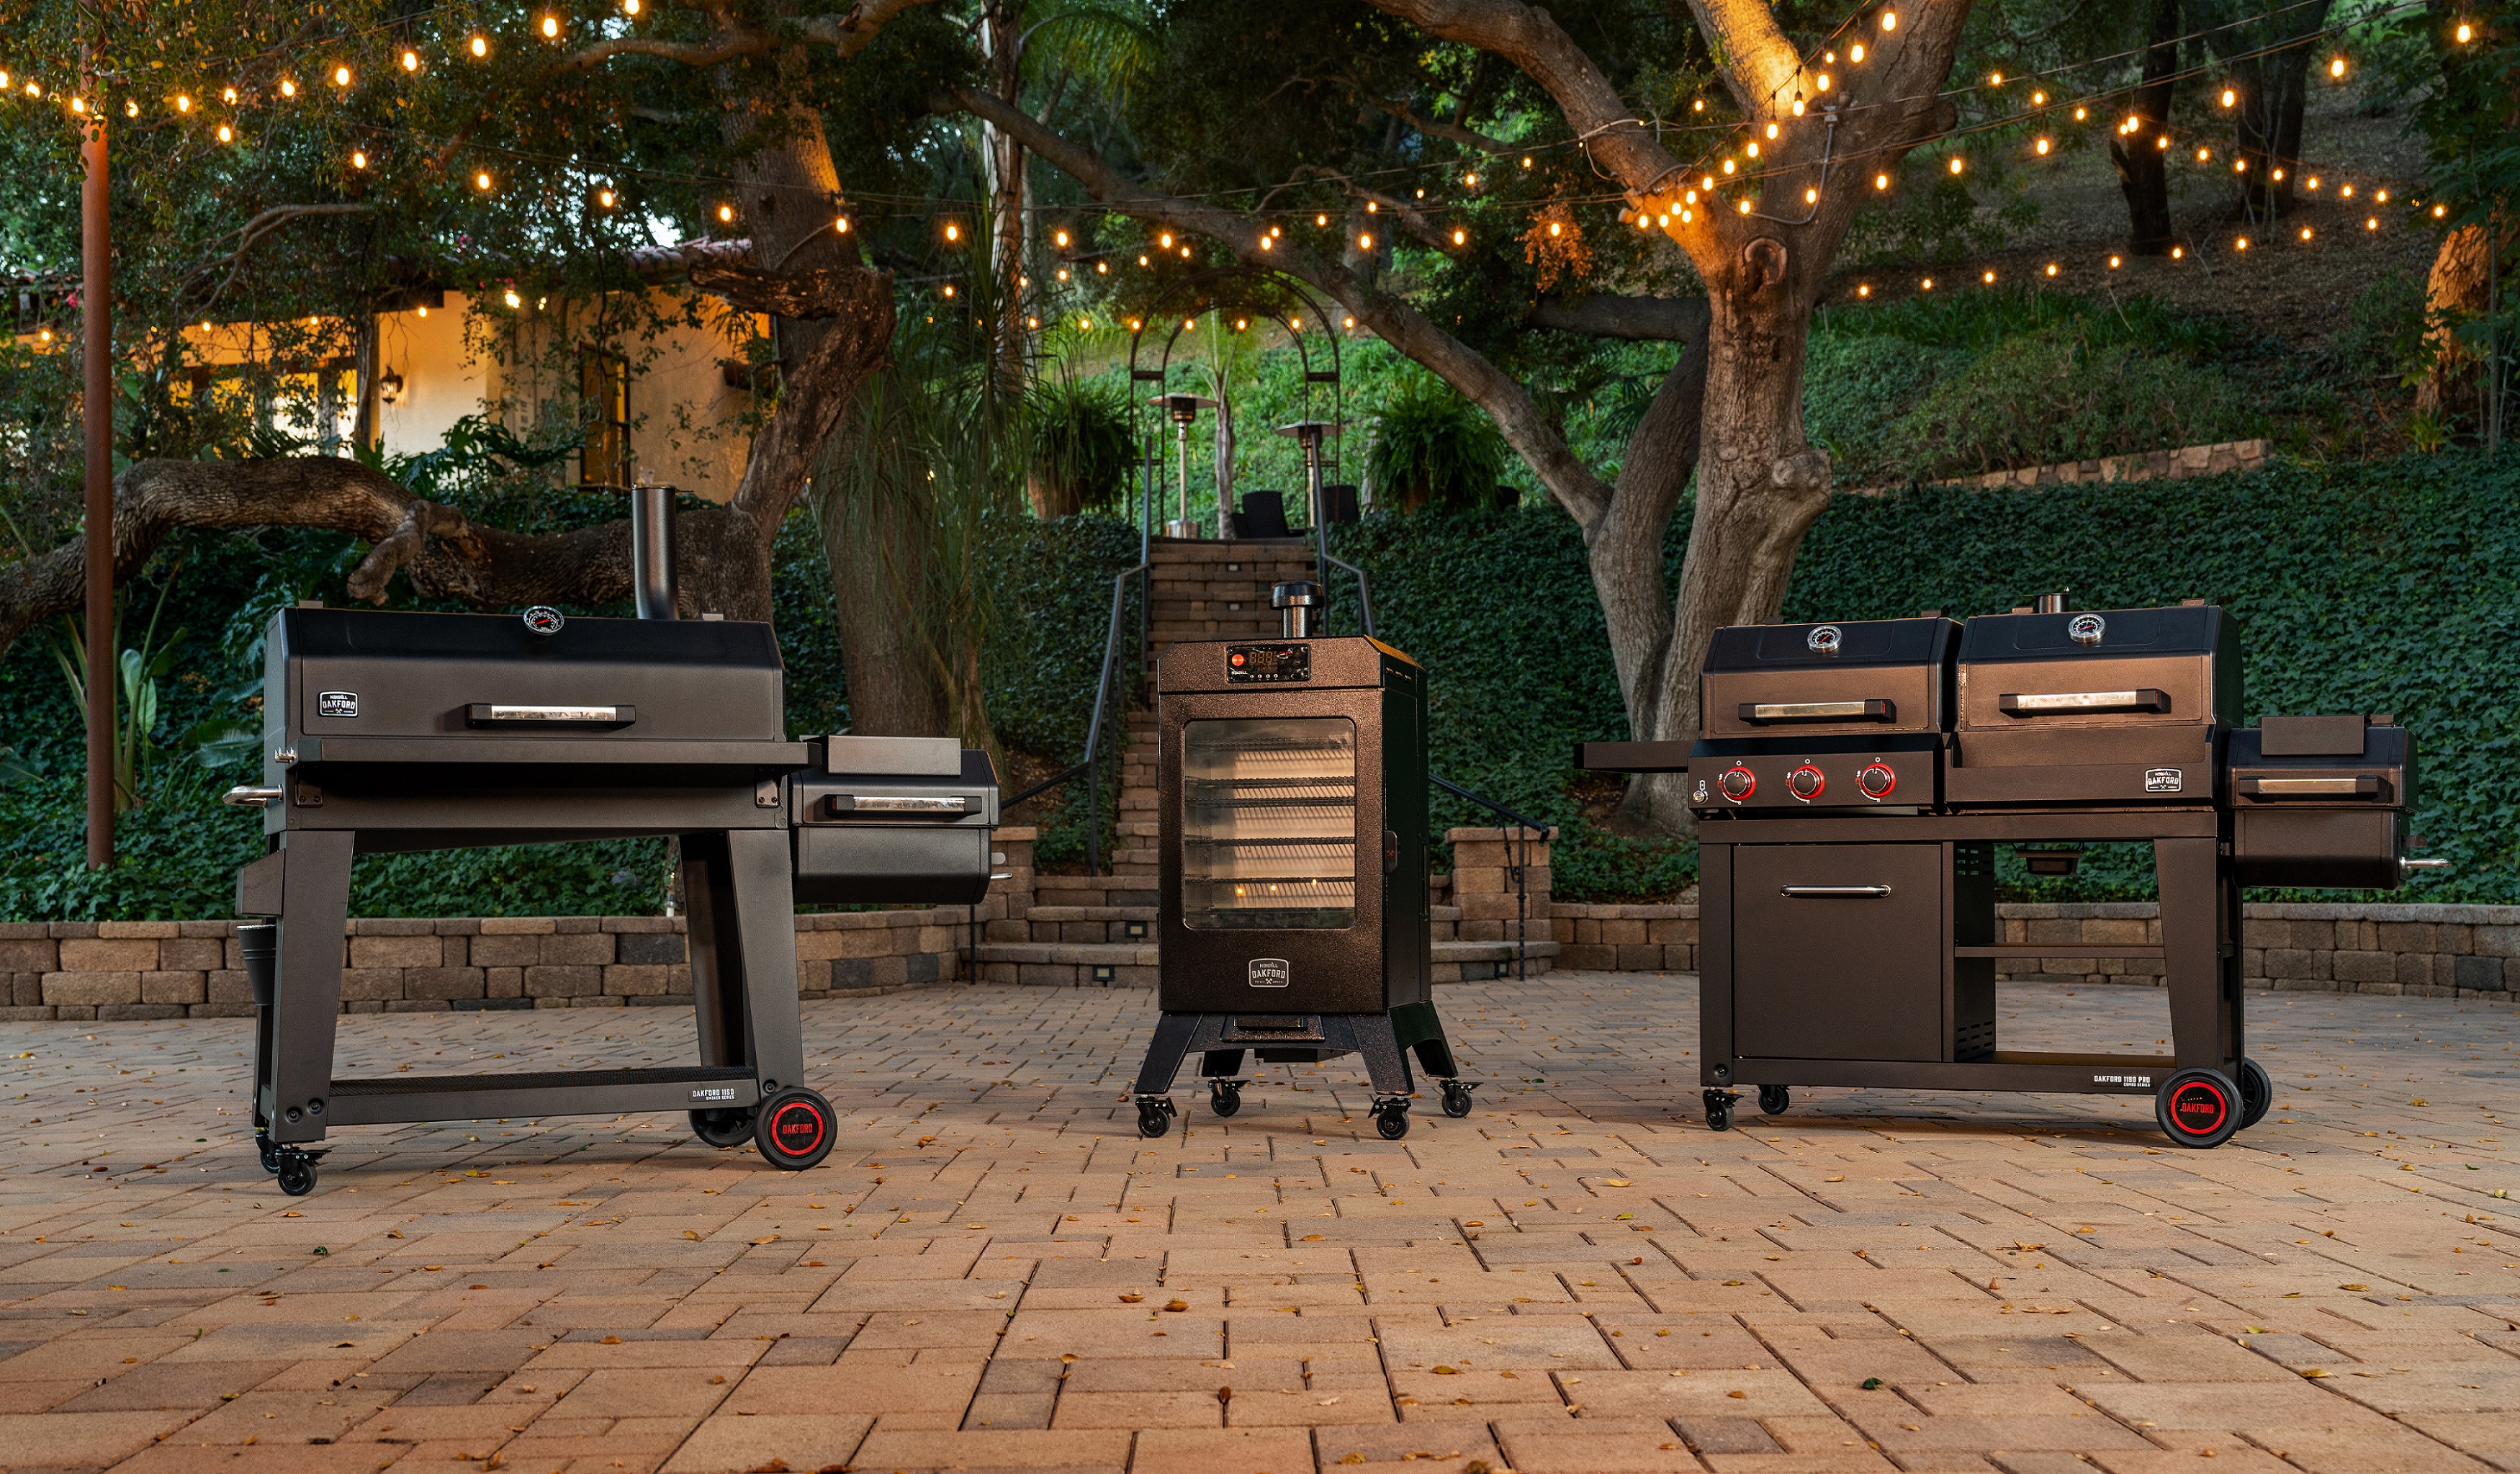 Nexgrill's offerings of pellet grills and smokers utilize pellets, charcoal, wood, gas and smart technology within a variety of functional designs.